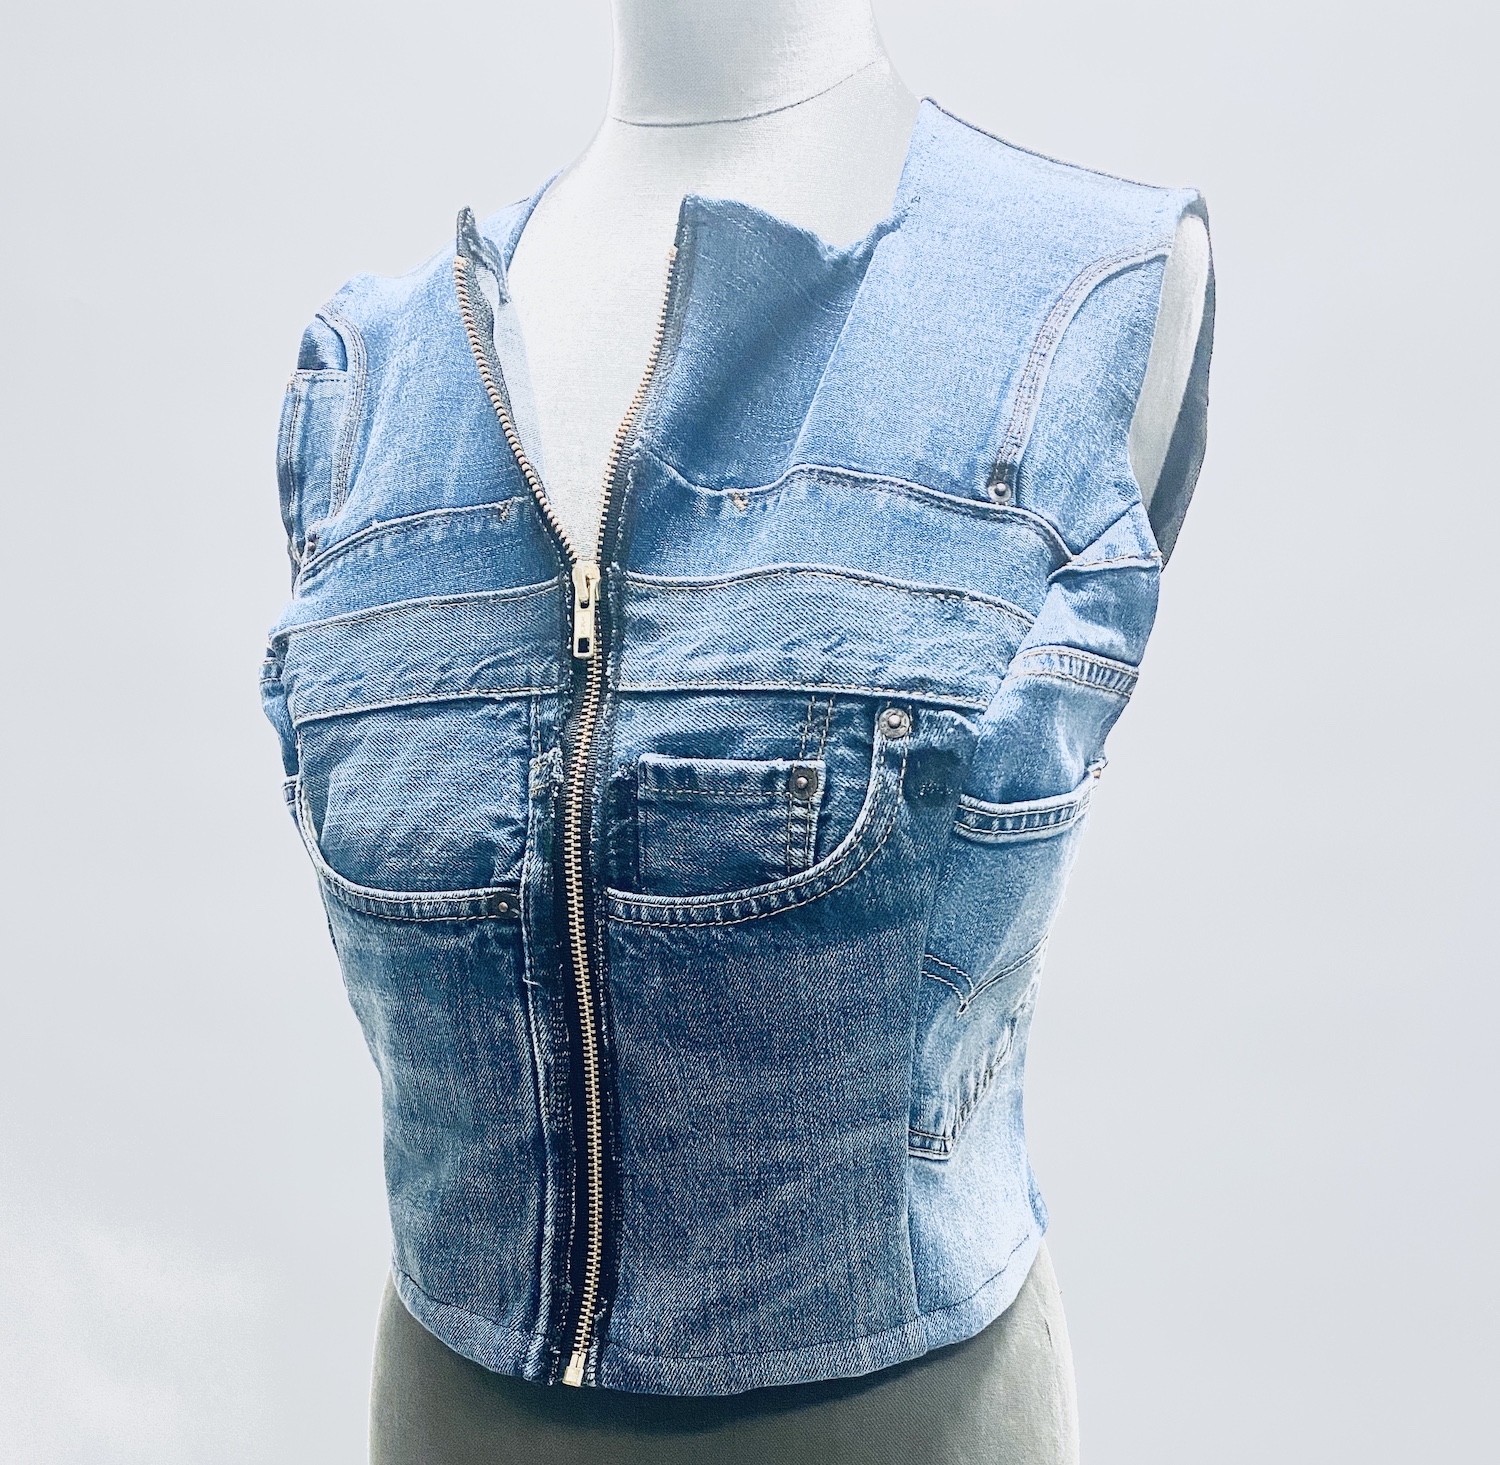 The Bustier Vest is on a mannequin. Made upcycled out of denim.